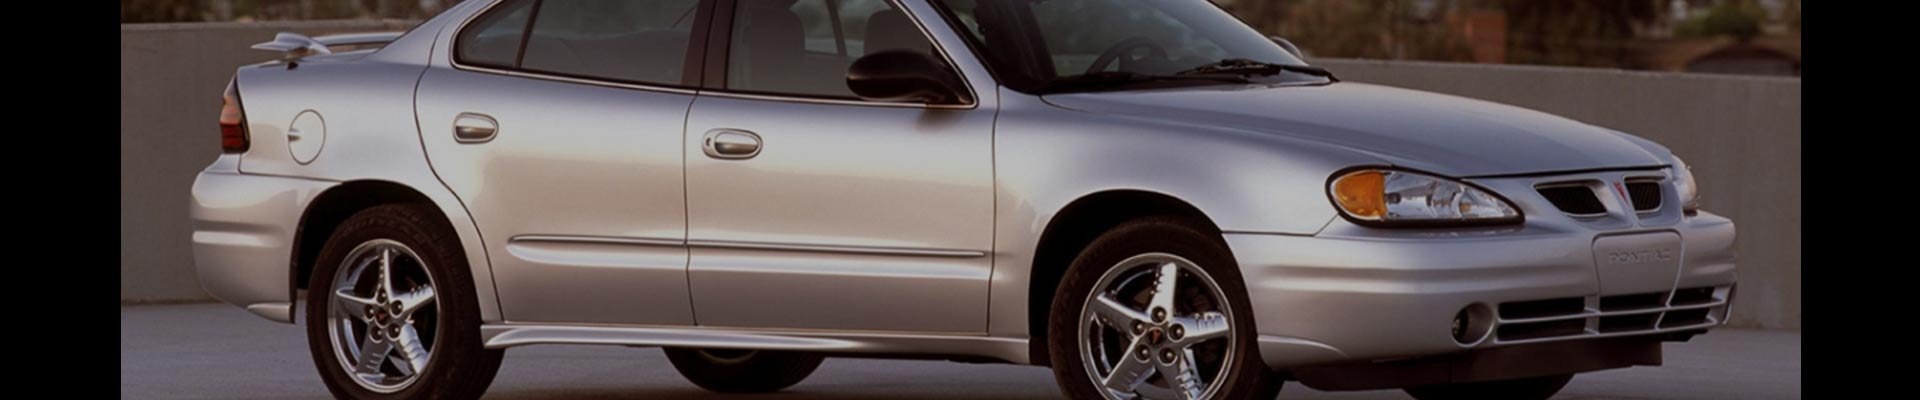 Shop Replacement and OEM 1991 Pontiac Grand Am Parts with Discounted Price on the Net